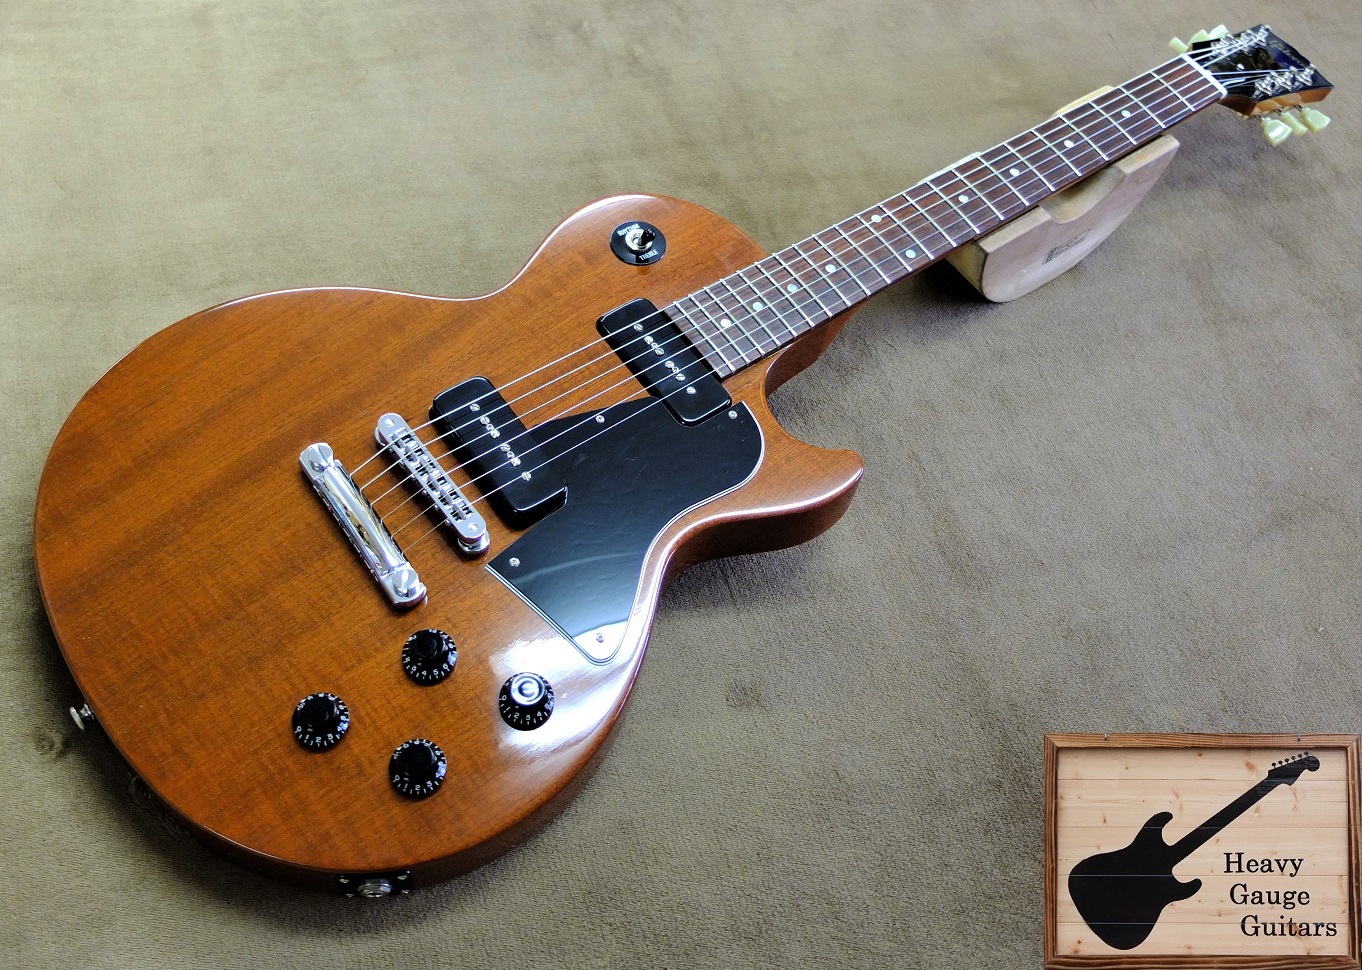 Gibson Les Paul Special ギブソン レスポールスペシャル - www.xtreme